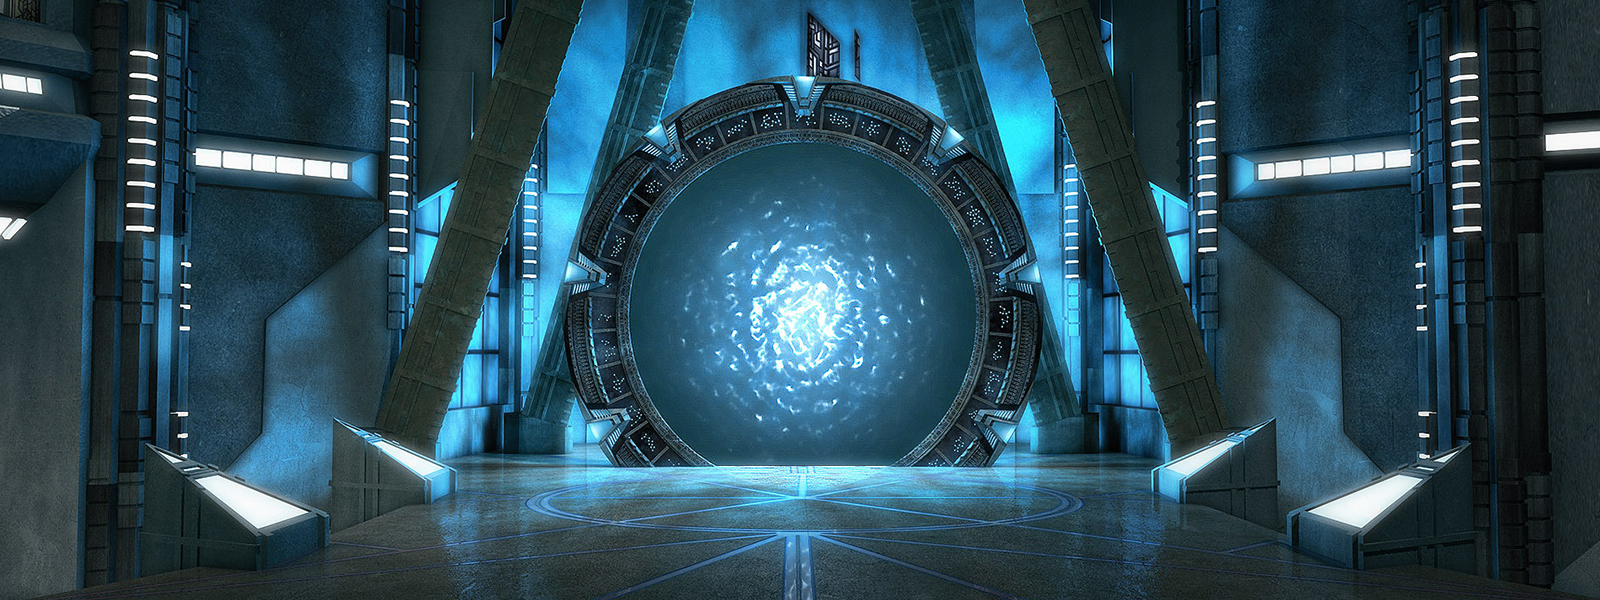 The Quest to Decipher the Stargate